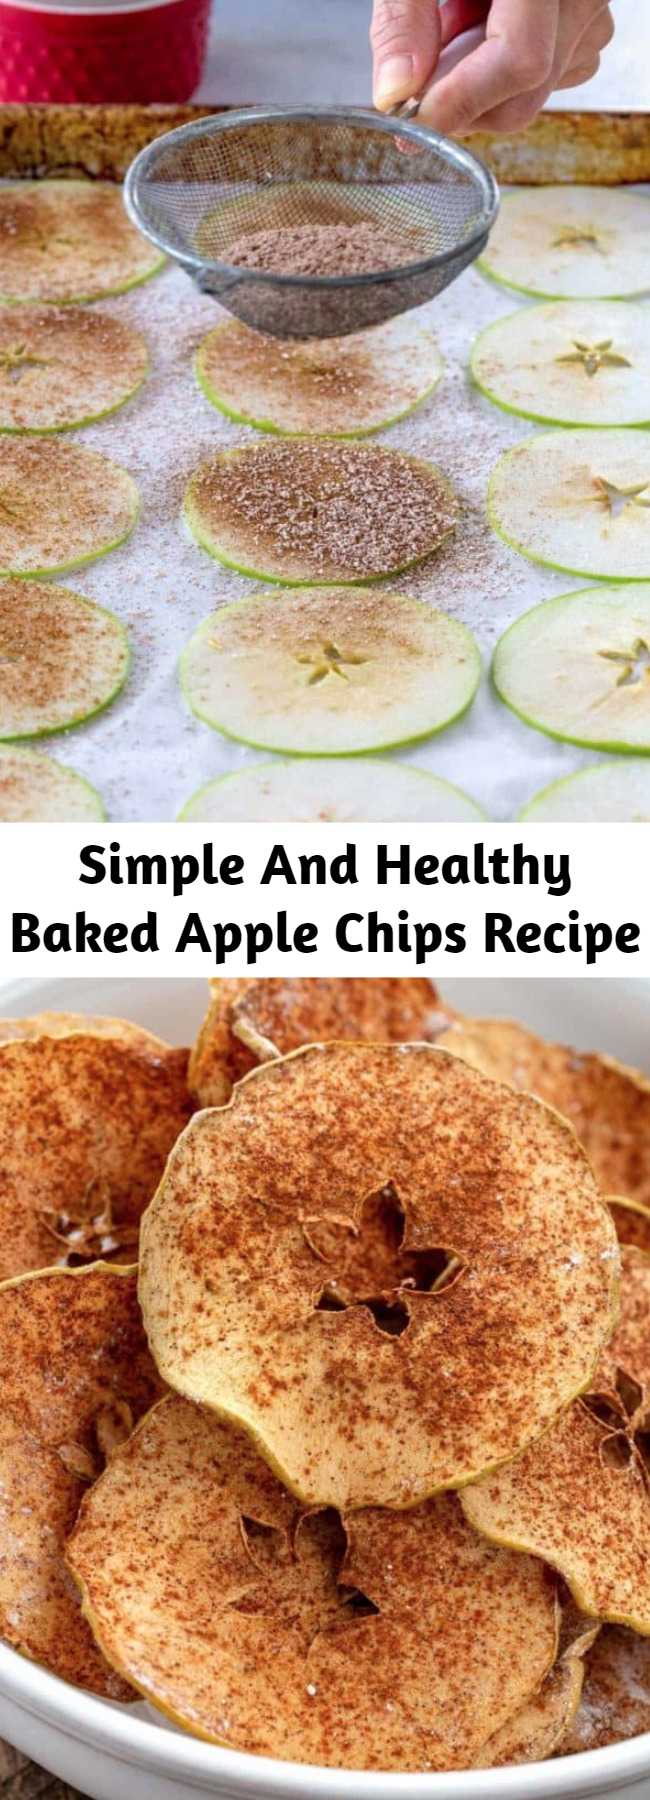 Simple And Healthy Baked Apple Chips Recipe - Chose your favorite apple variety to make these simple and healthy baked cinnamon apple chips! Cinnamon enhances the flavor while cutting the apples into thin slices, and baking at a low oven temperature for a few hours ensures super crispy chips. These crisp apple chips are delicious and addicting, without the guilt!